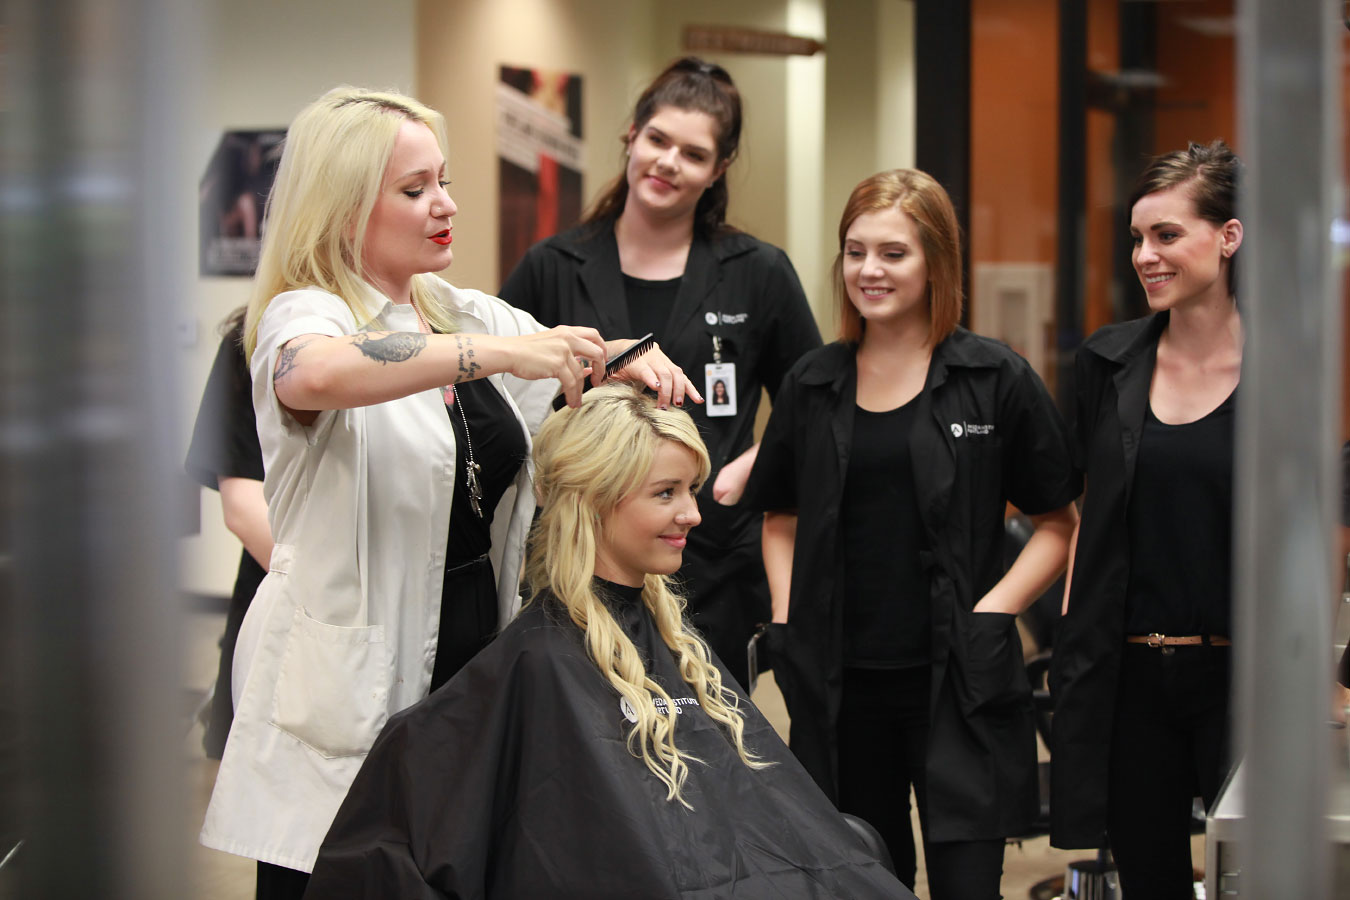 Instructors at the Aveda Institute Portland